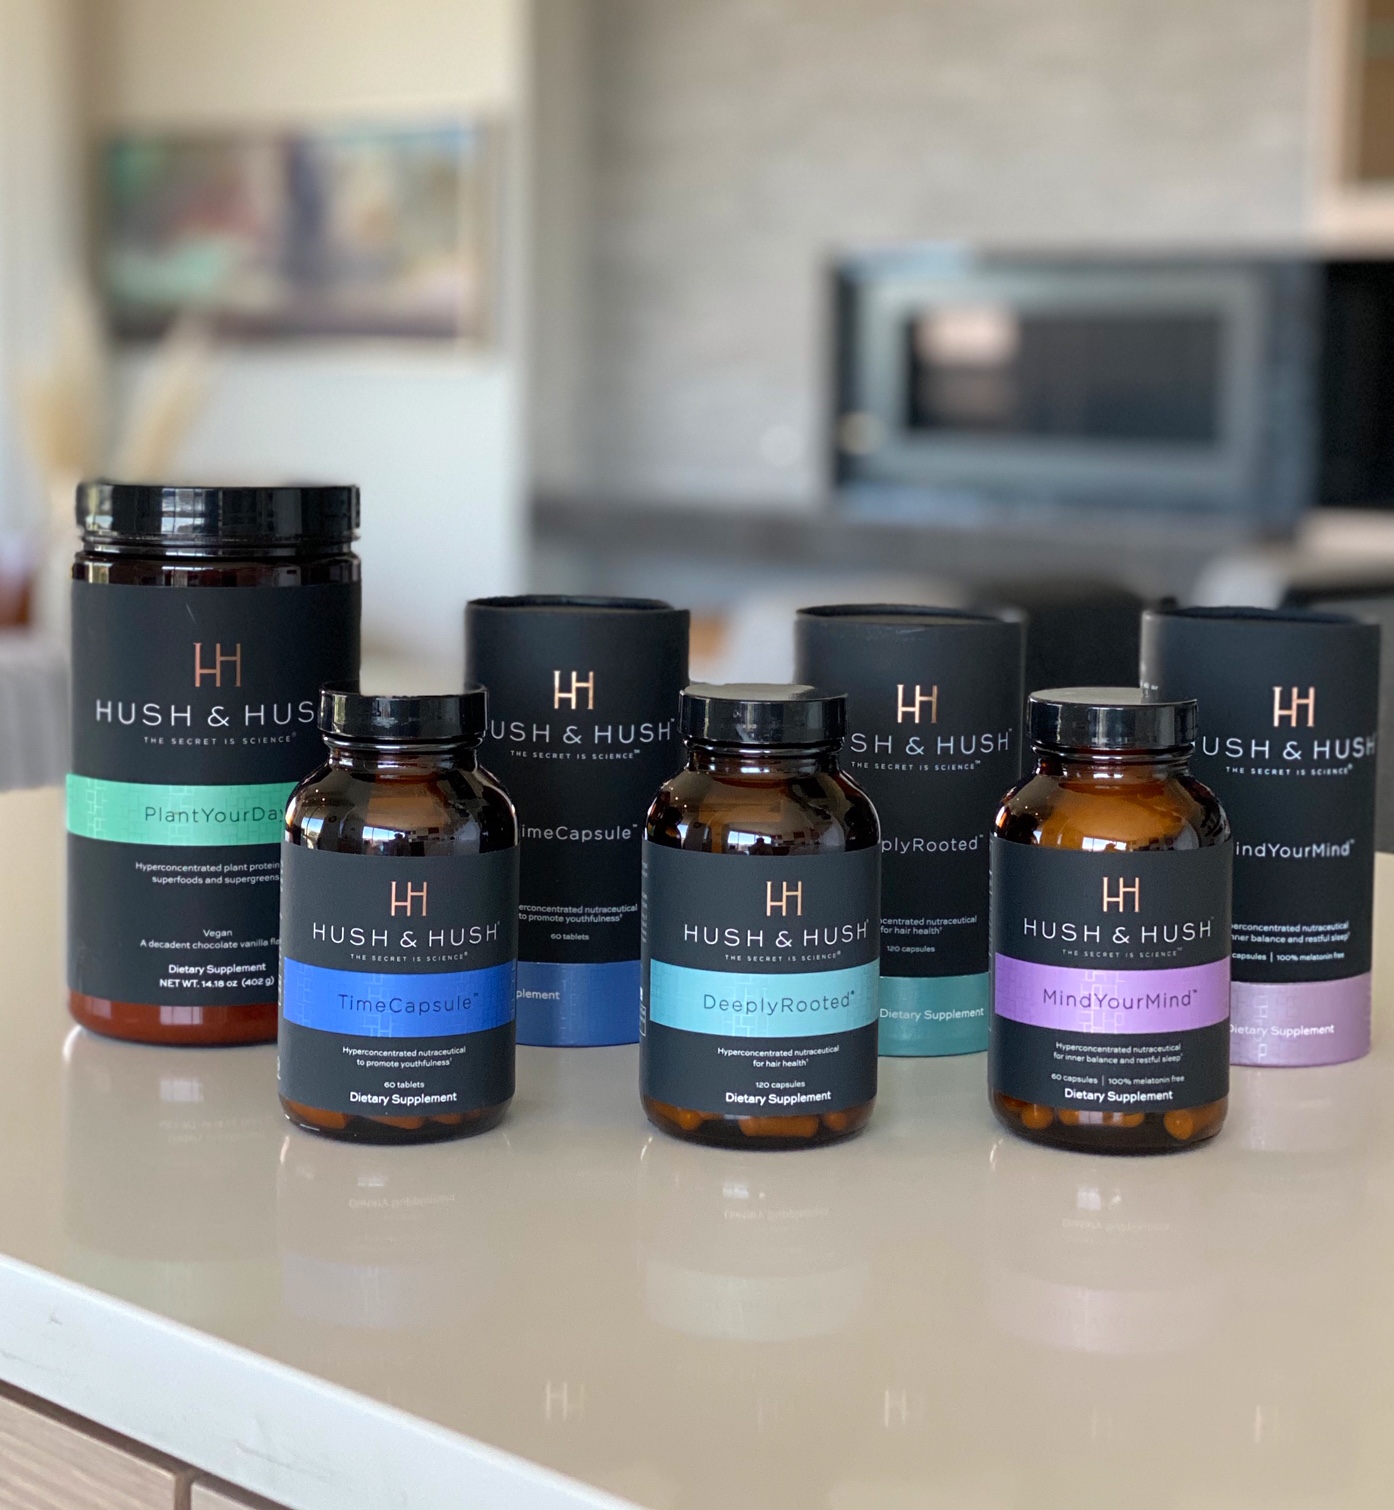 Four Hush & Hush luxury Nutraceuticals and beauty supplements for aging better 